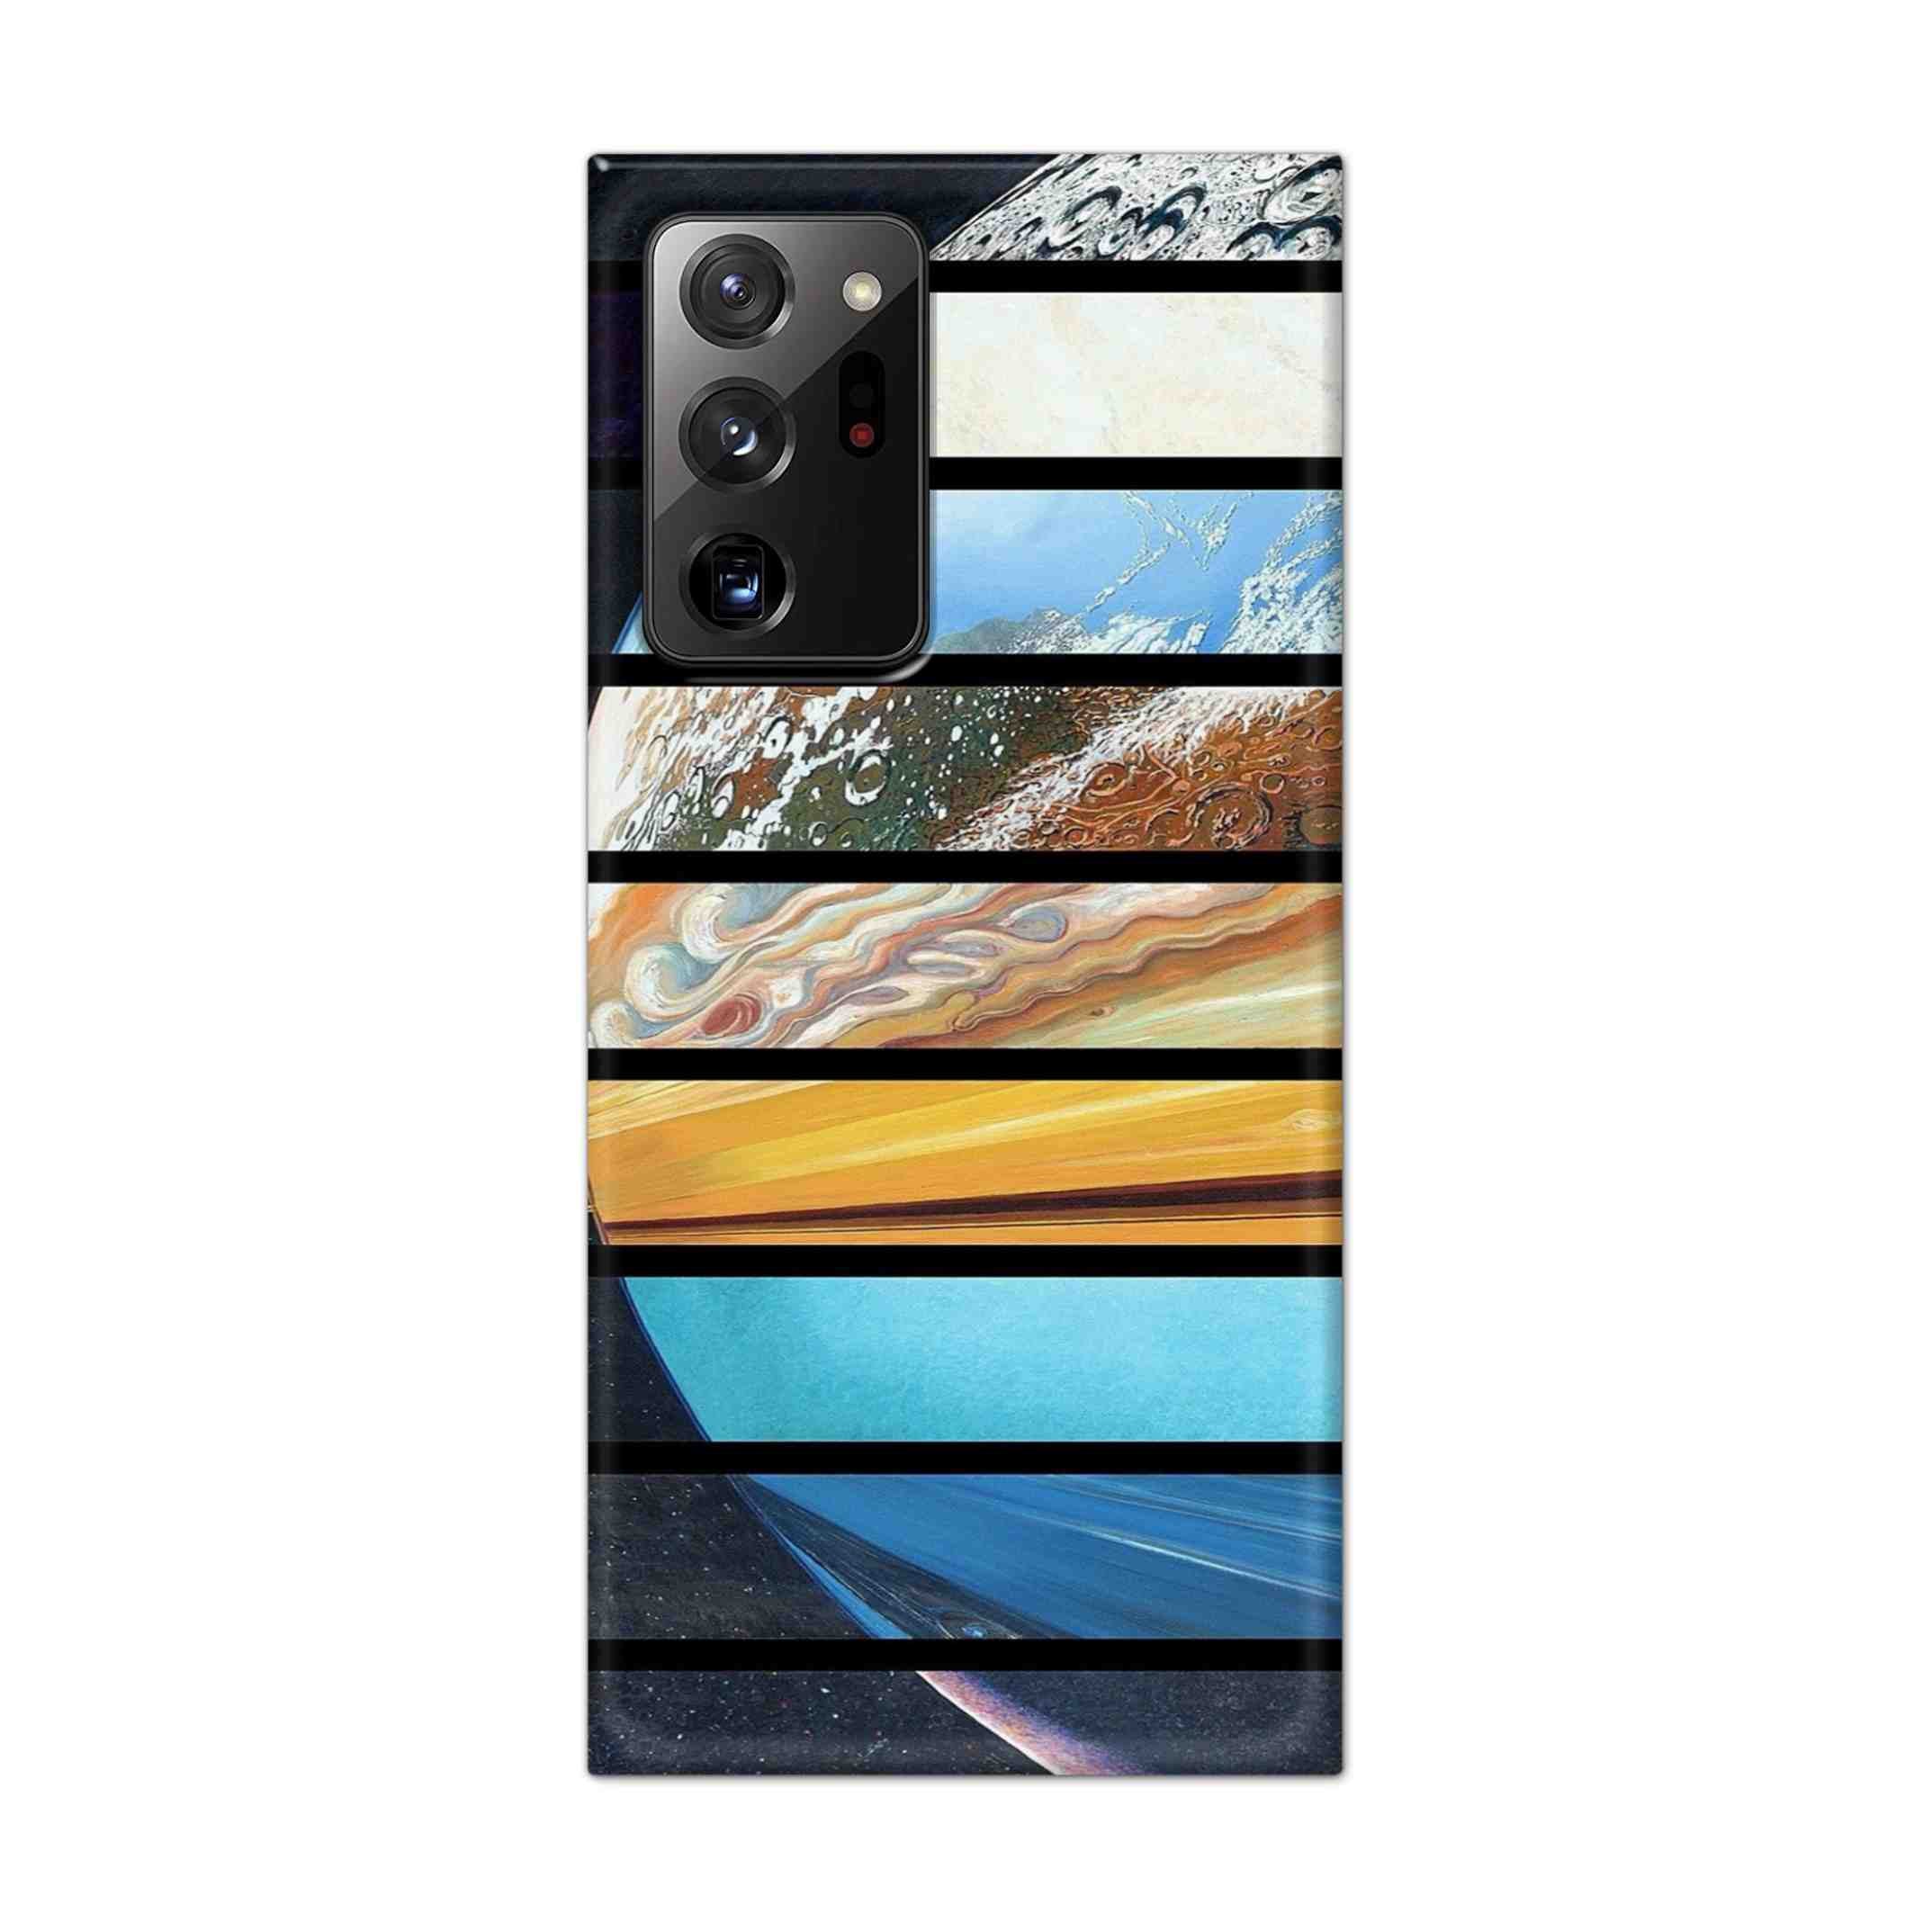 Buy Colourful Earth Hard Back Mobile Phone Case Cover For Samsung Galaxy Note 20 Ultra Online